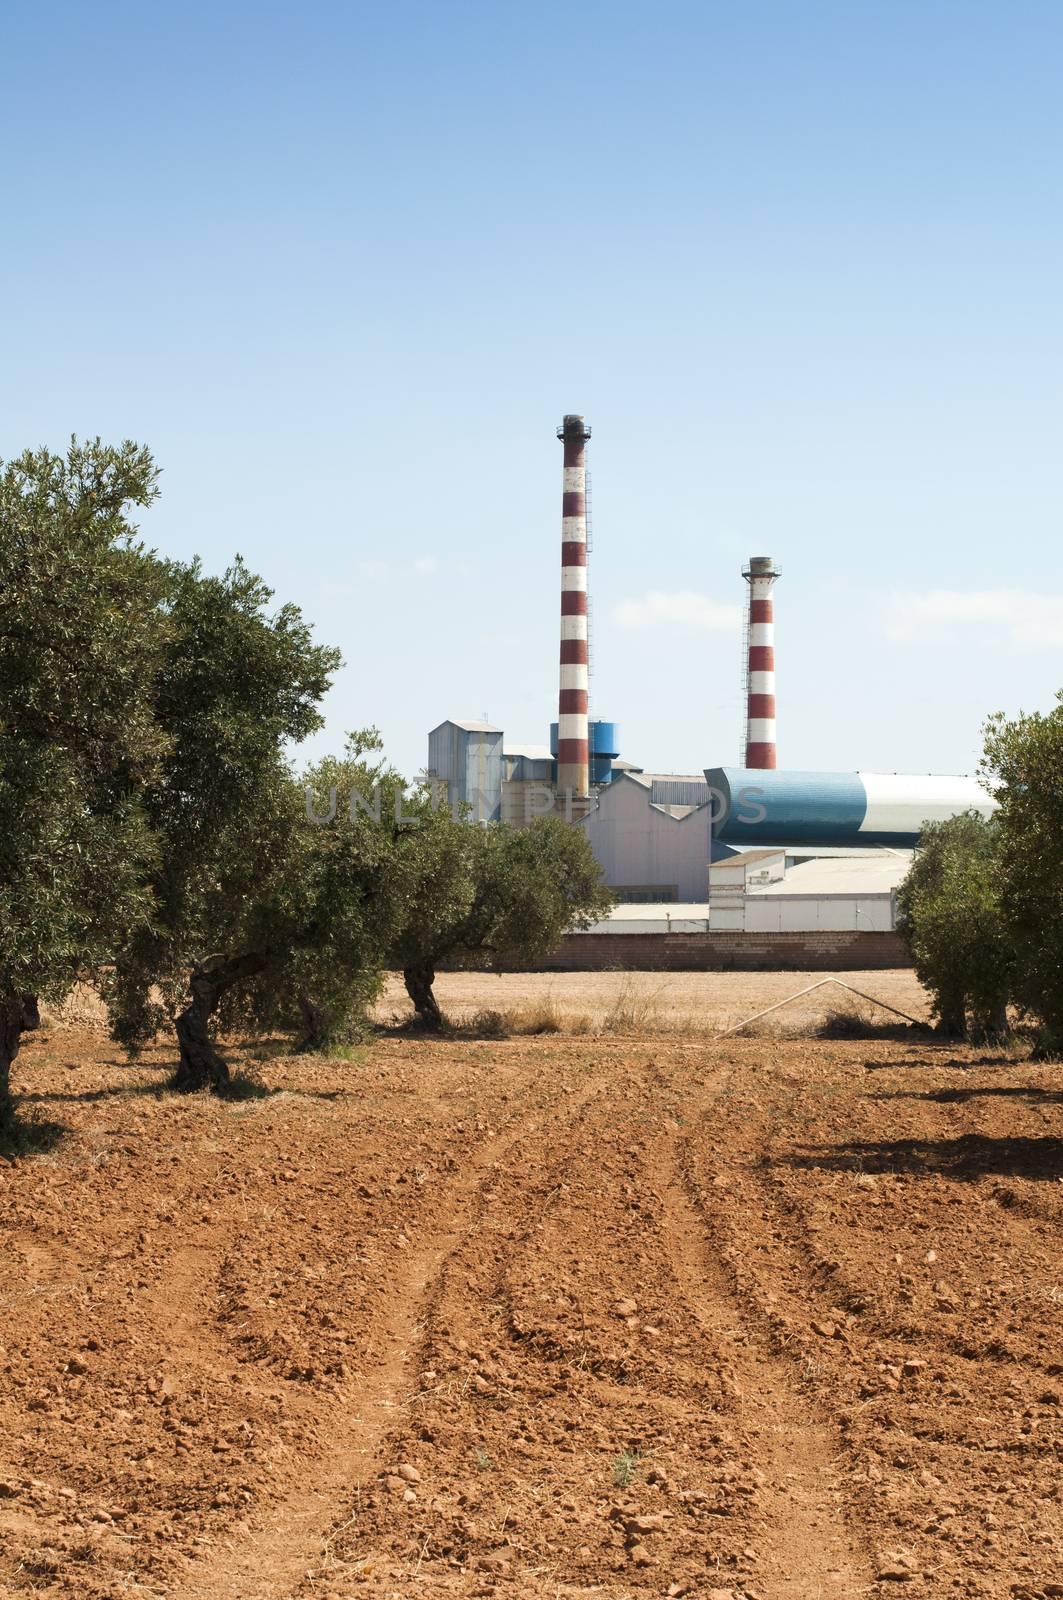 Olive trees and factory on the background